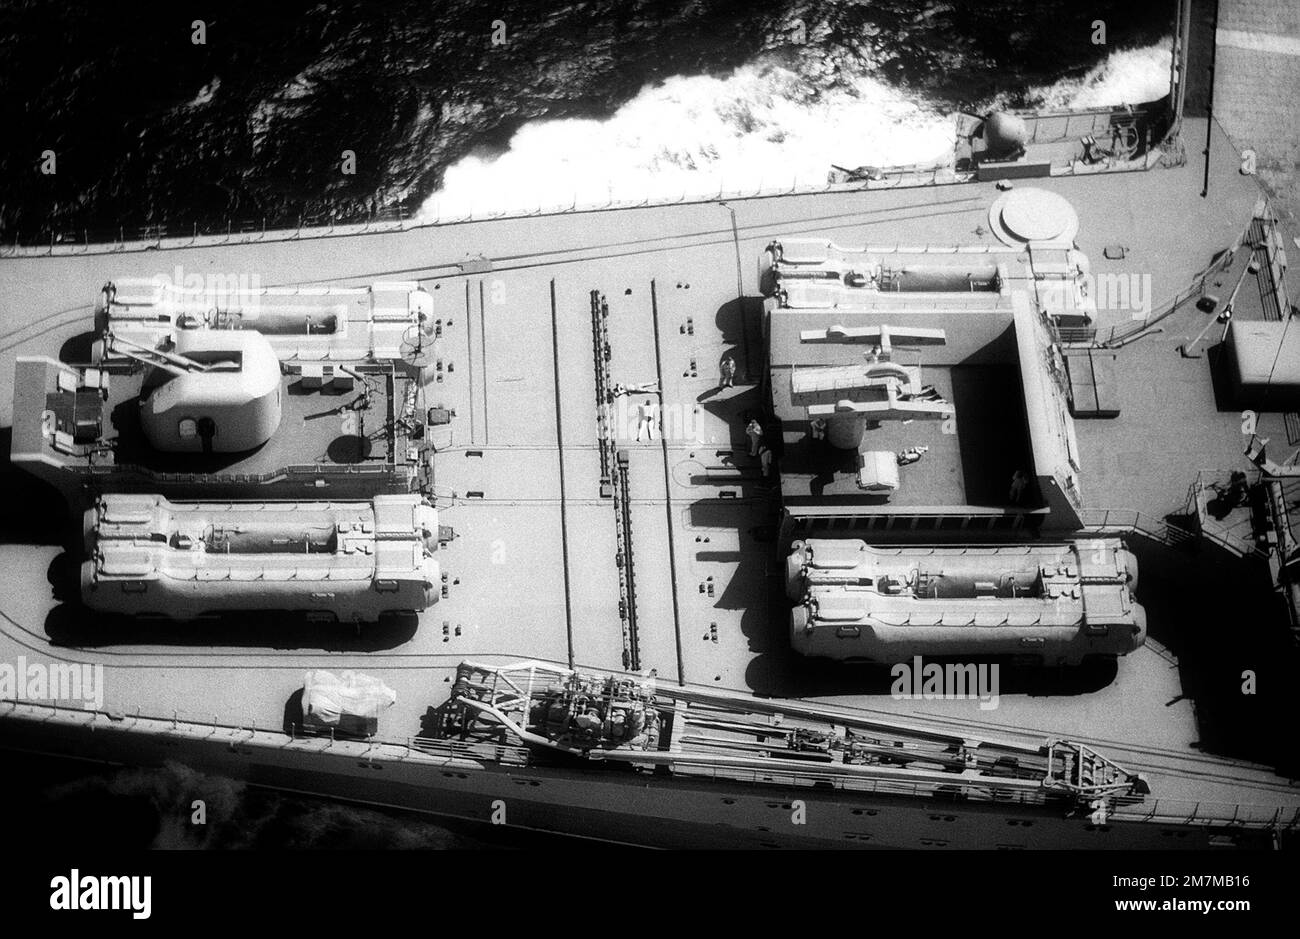 An elevated view of the bow of the Soviet aircraft carrier KIEV (CVHG) showing a 76.2mm/60-caliber anti-aircraft gun, eight SS-N-12 Shaddock missile launch tubes and an SA-N-3 missile launcher. A retracted SA-N-4 missile launcher is under the circular cover plate in the upper left. Country: Mediterranean Sea (MED) Stock Photo